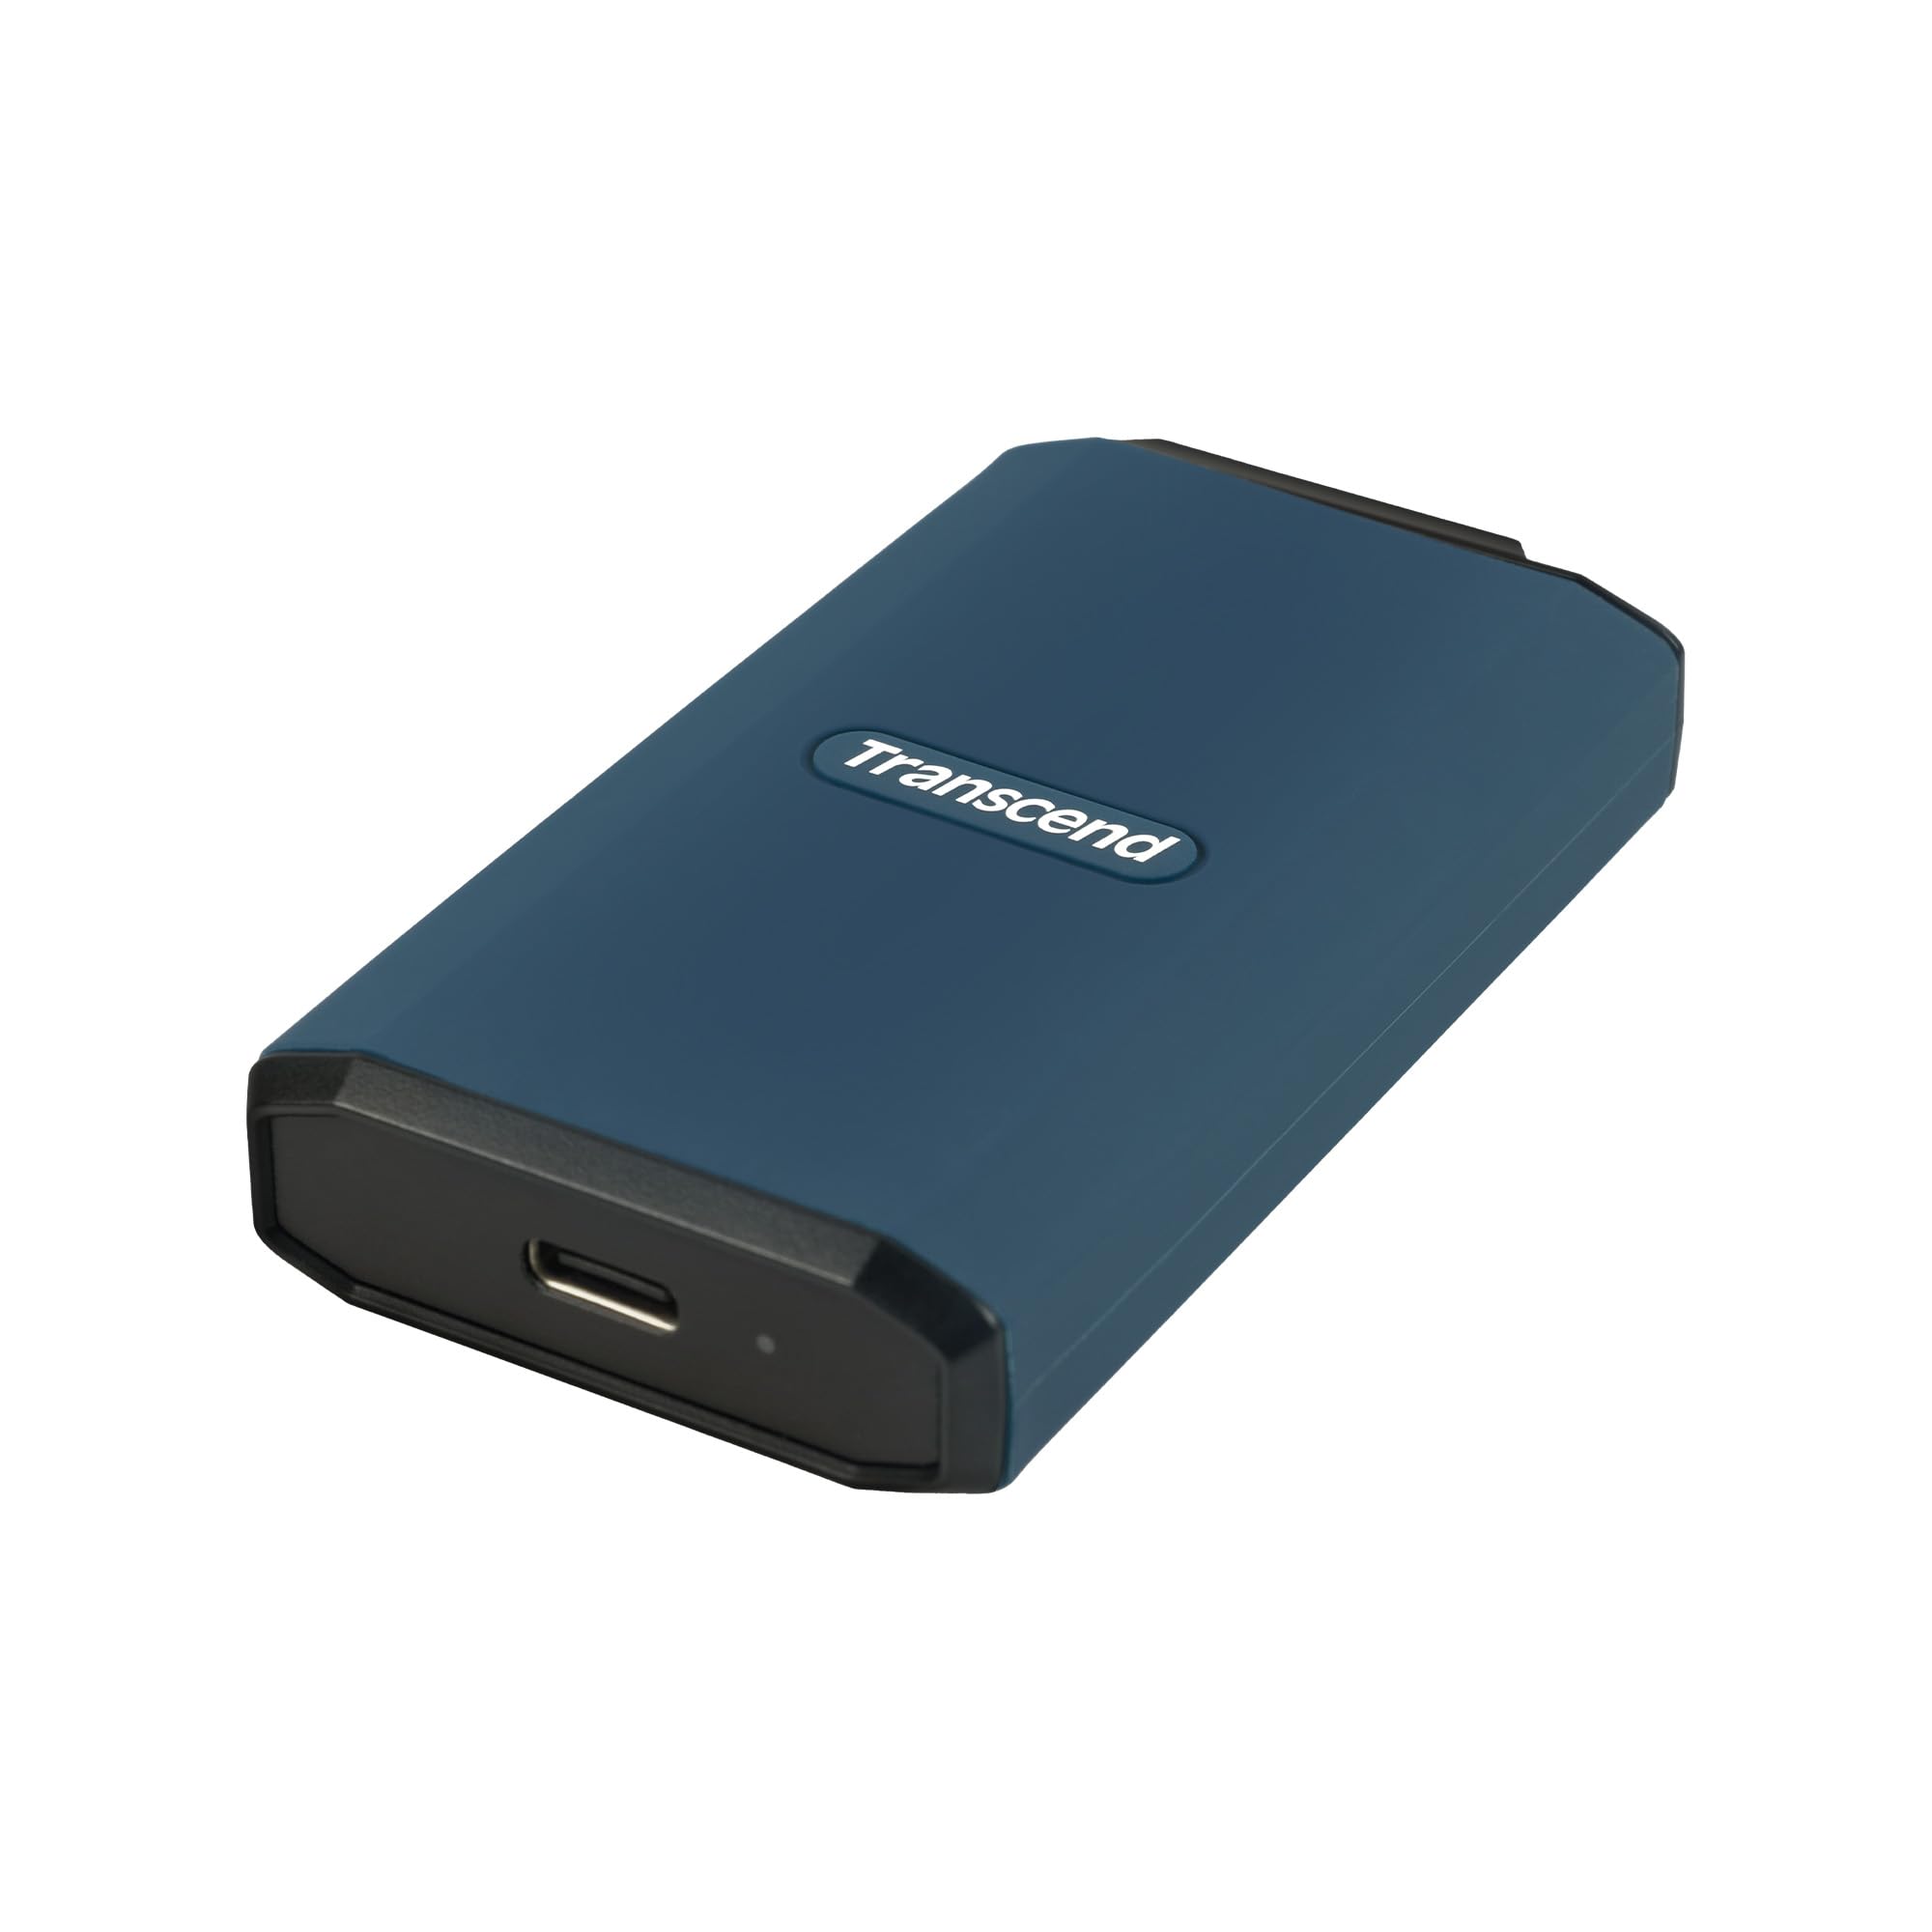 Transcend 2TB External, Portable, Military Drop Test Certified SSD, ESD410C, USB 20Gbps, Type C TS2TESD410C